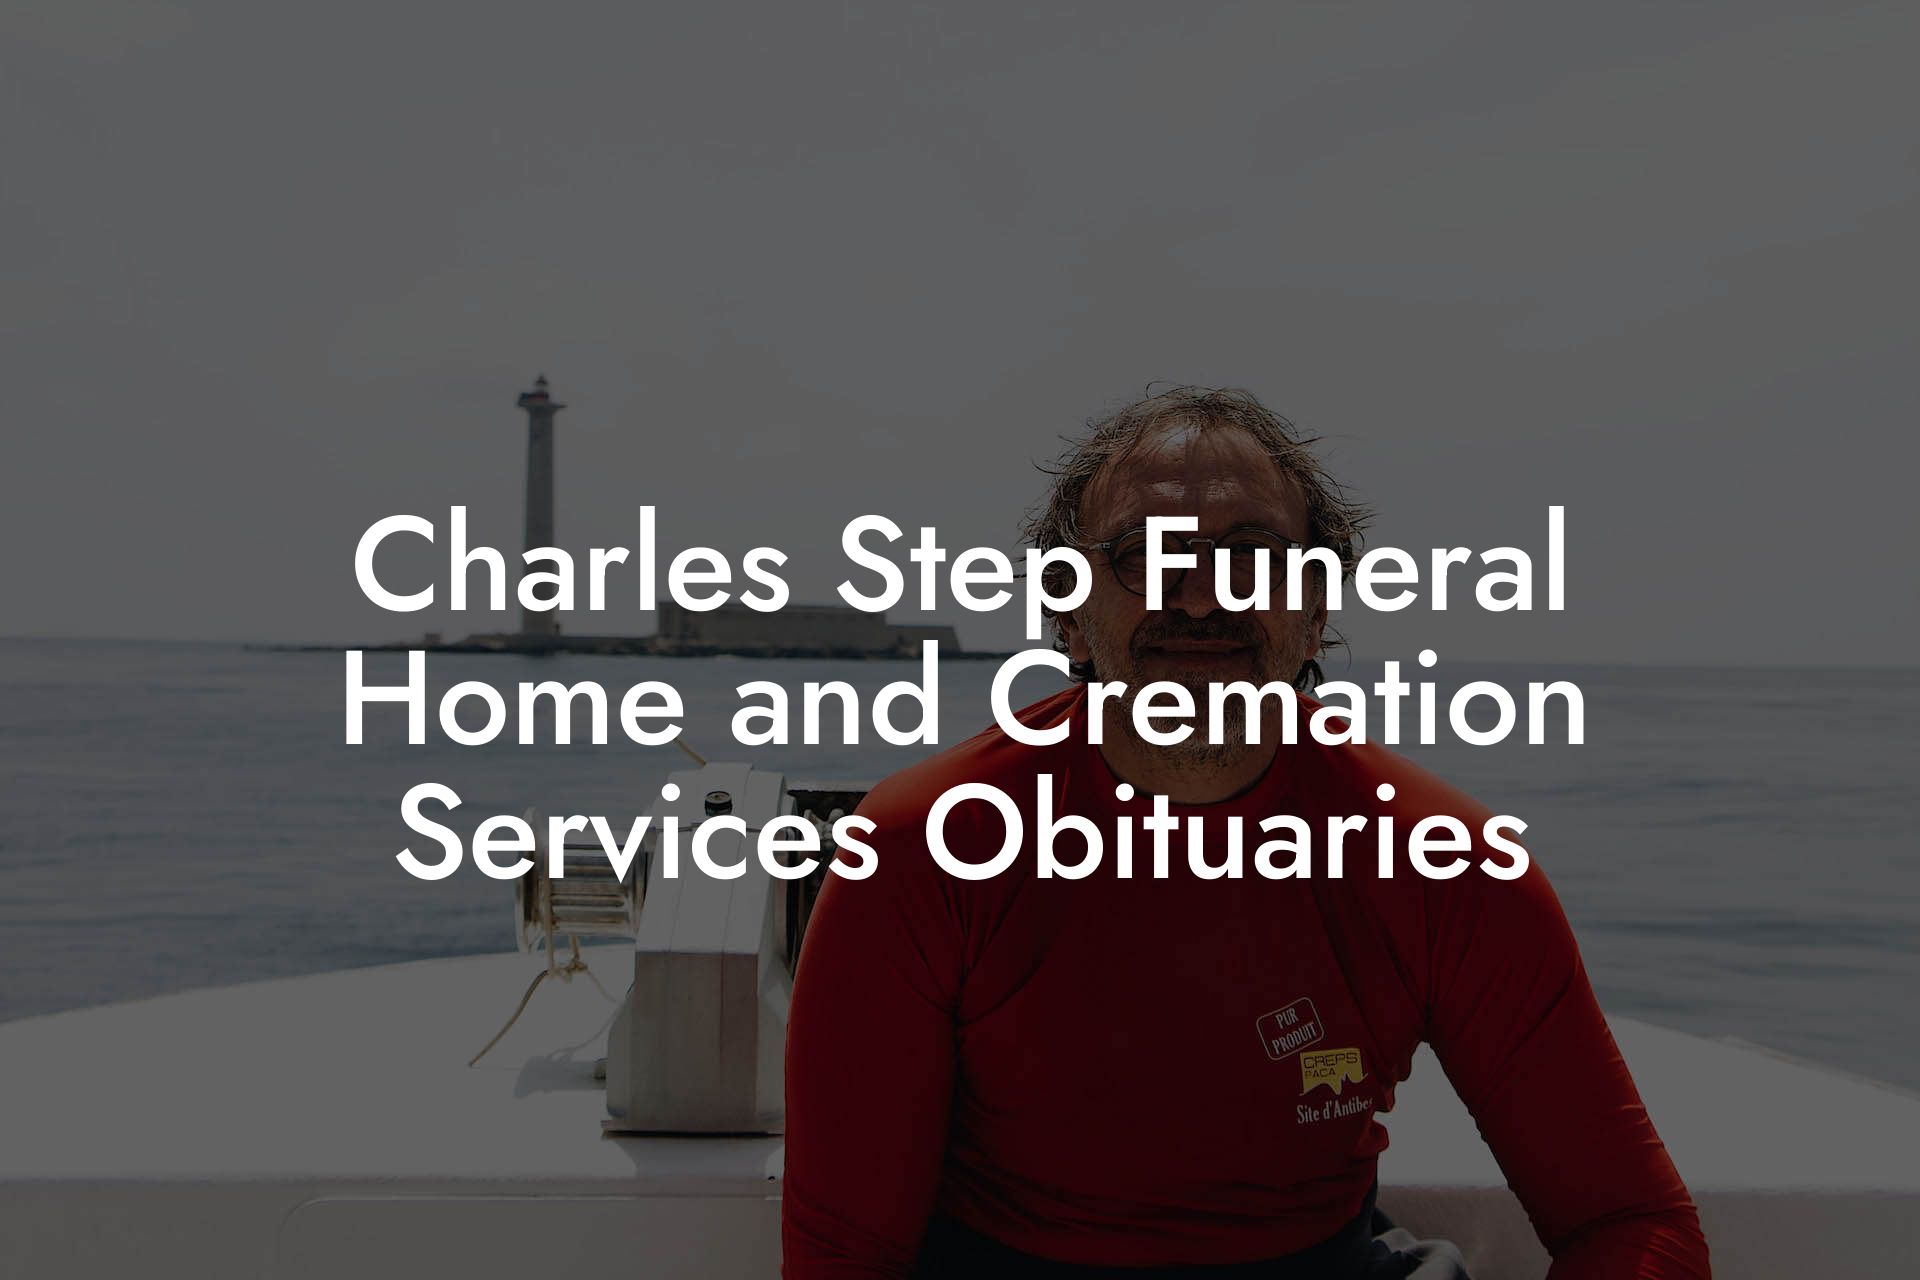 Charles Step Funeral Home and Cremation Services Obituaries